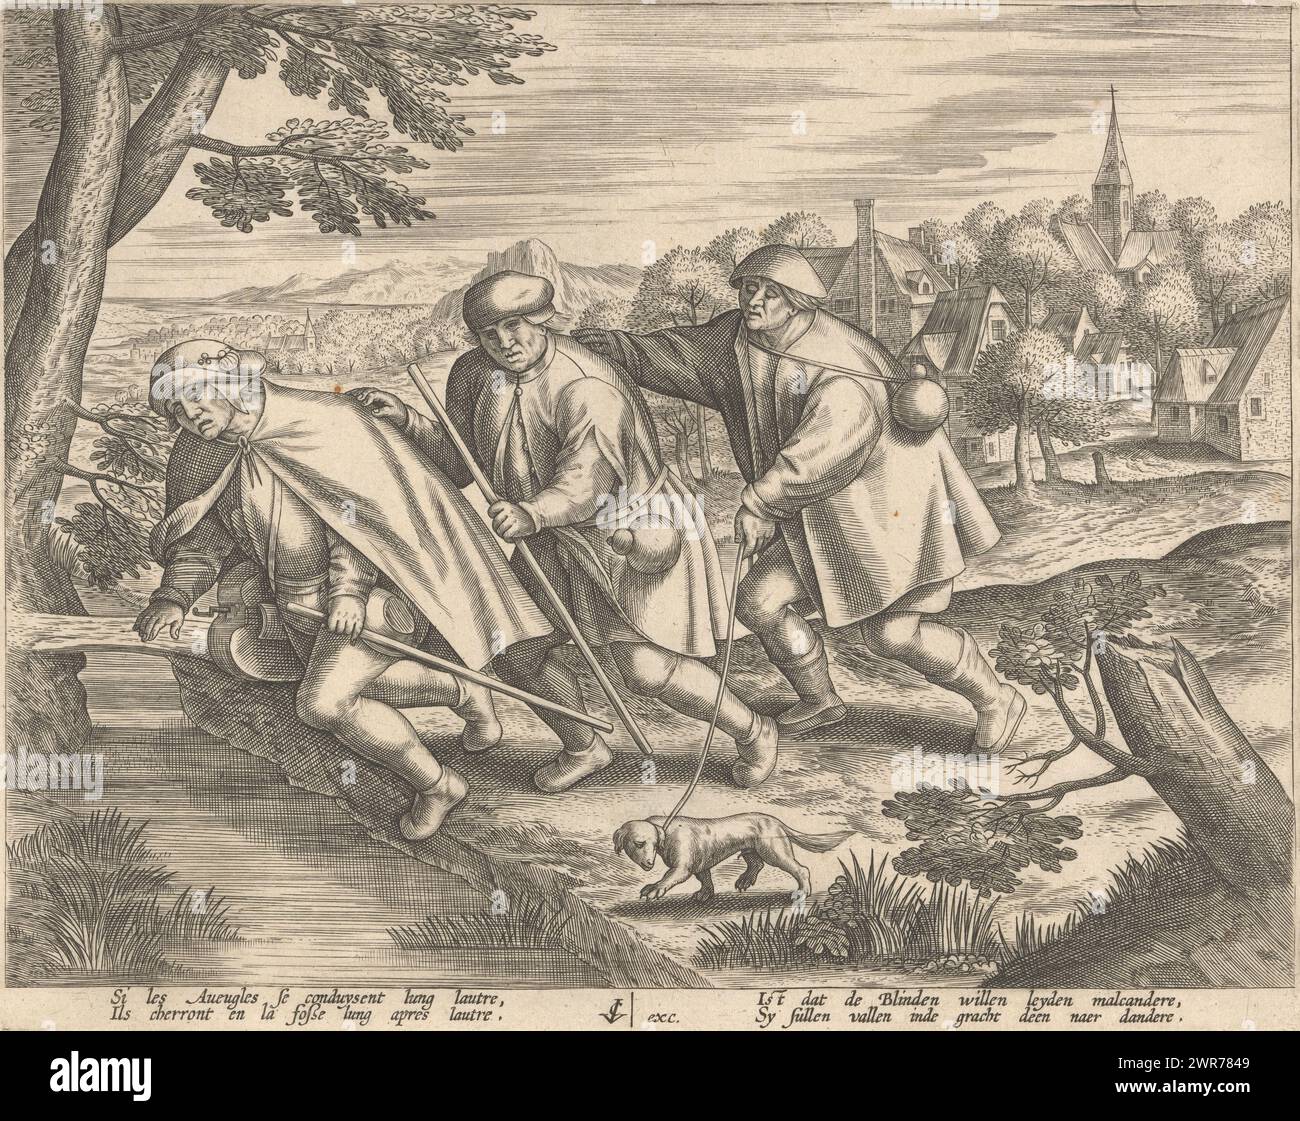 The blind lead the blind, Three blind men walk behind each other and allow themselves to be led by the one in front of them. The front one falls into a ditch. The third man holds a dog on a leash. Below the performance is a two-line verse in French and Dutch., print maker: anonymous, after design by: Pieter Bruegel (I), (possibly), publisher: Claes Jansz. Visscher (II), Amsterdam, 1601 - 1652, paper, engraving, height 182 mm × width 229 mm, print Stock Photo